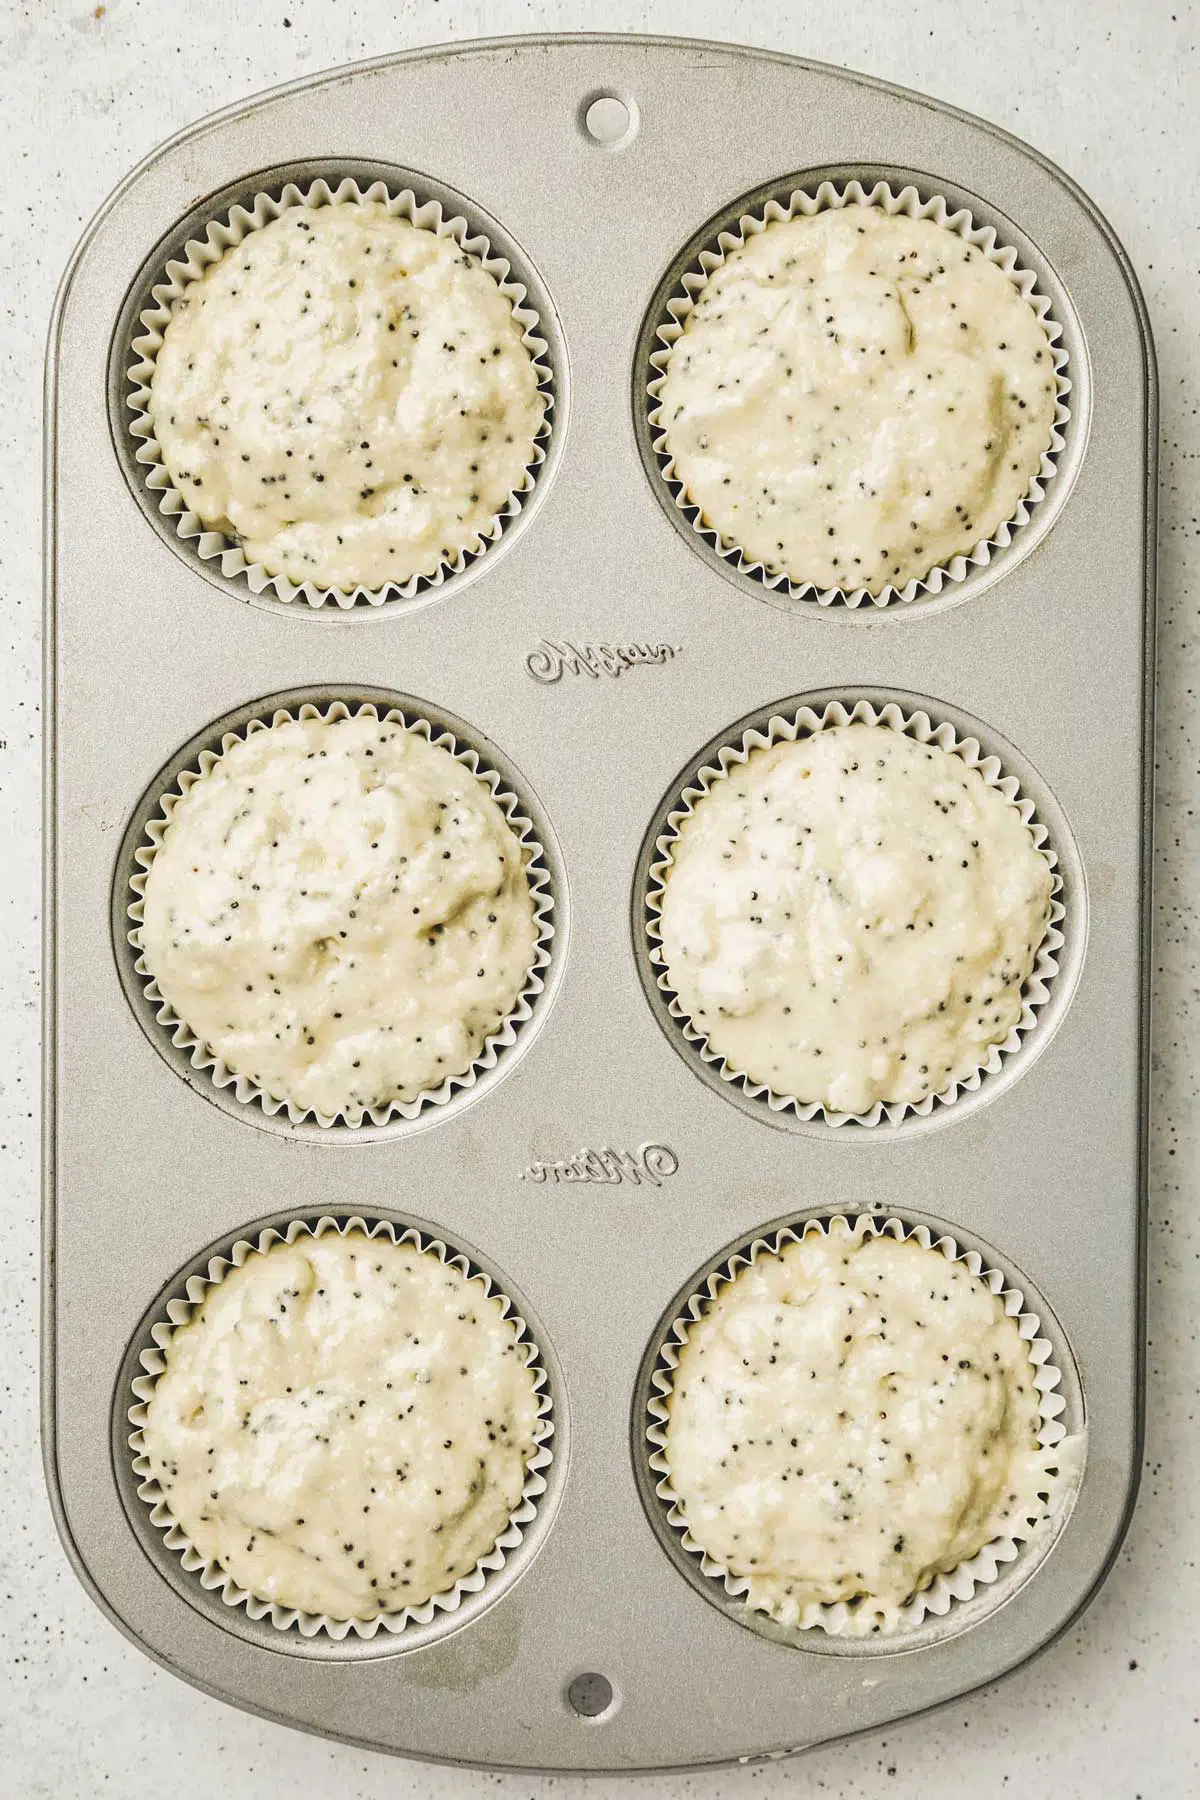 Cupcake mold with lemon poppy seed muffins before baking